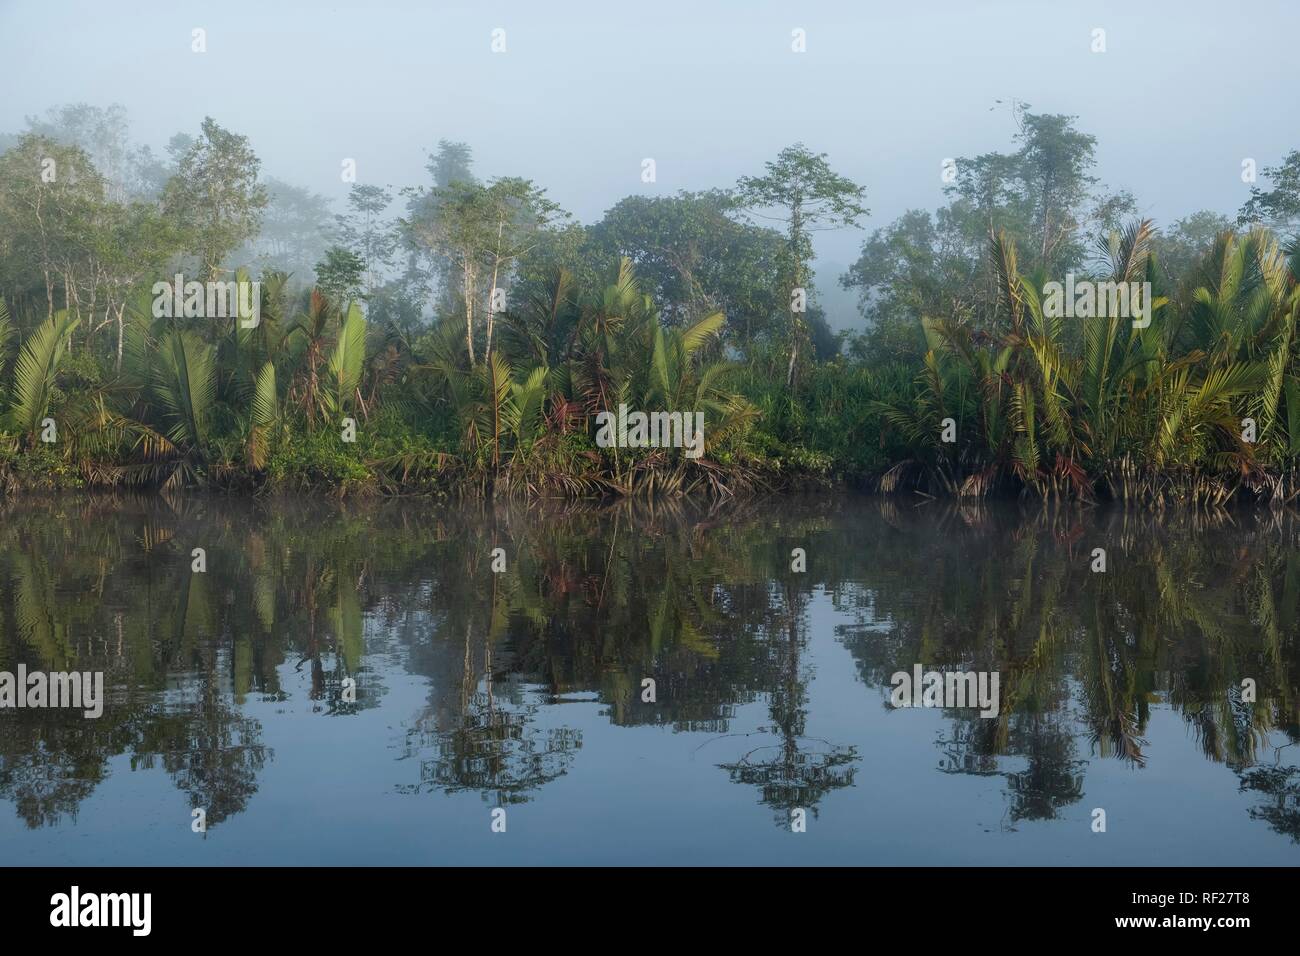 Fog and water reflection in the river Sungai Sekonyer in Tanjung Puting National Park, Central Kalimantan, Borneo, Indonesia Stock Photo